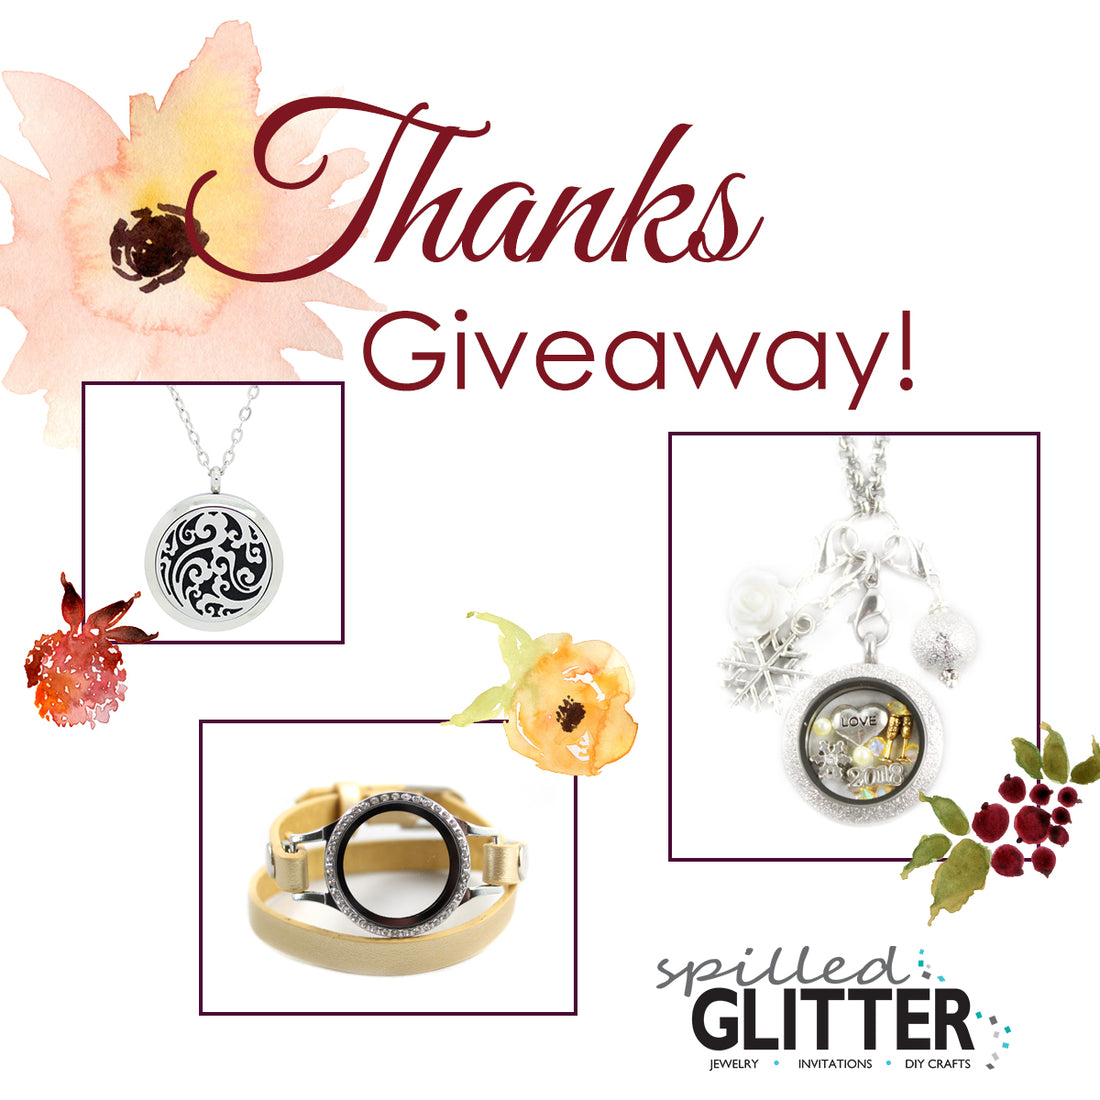 Thanks-Giveaway Jewelry Contest Sweepstakes